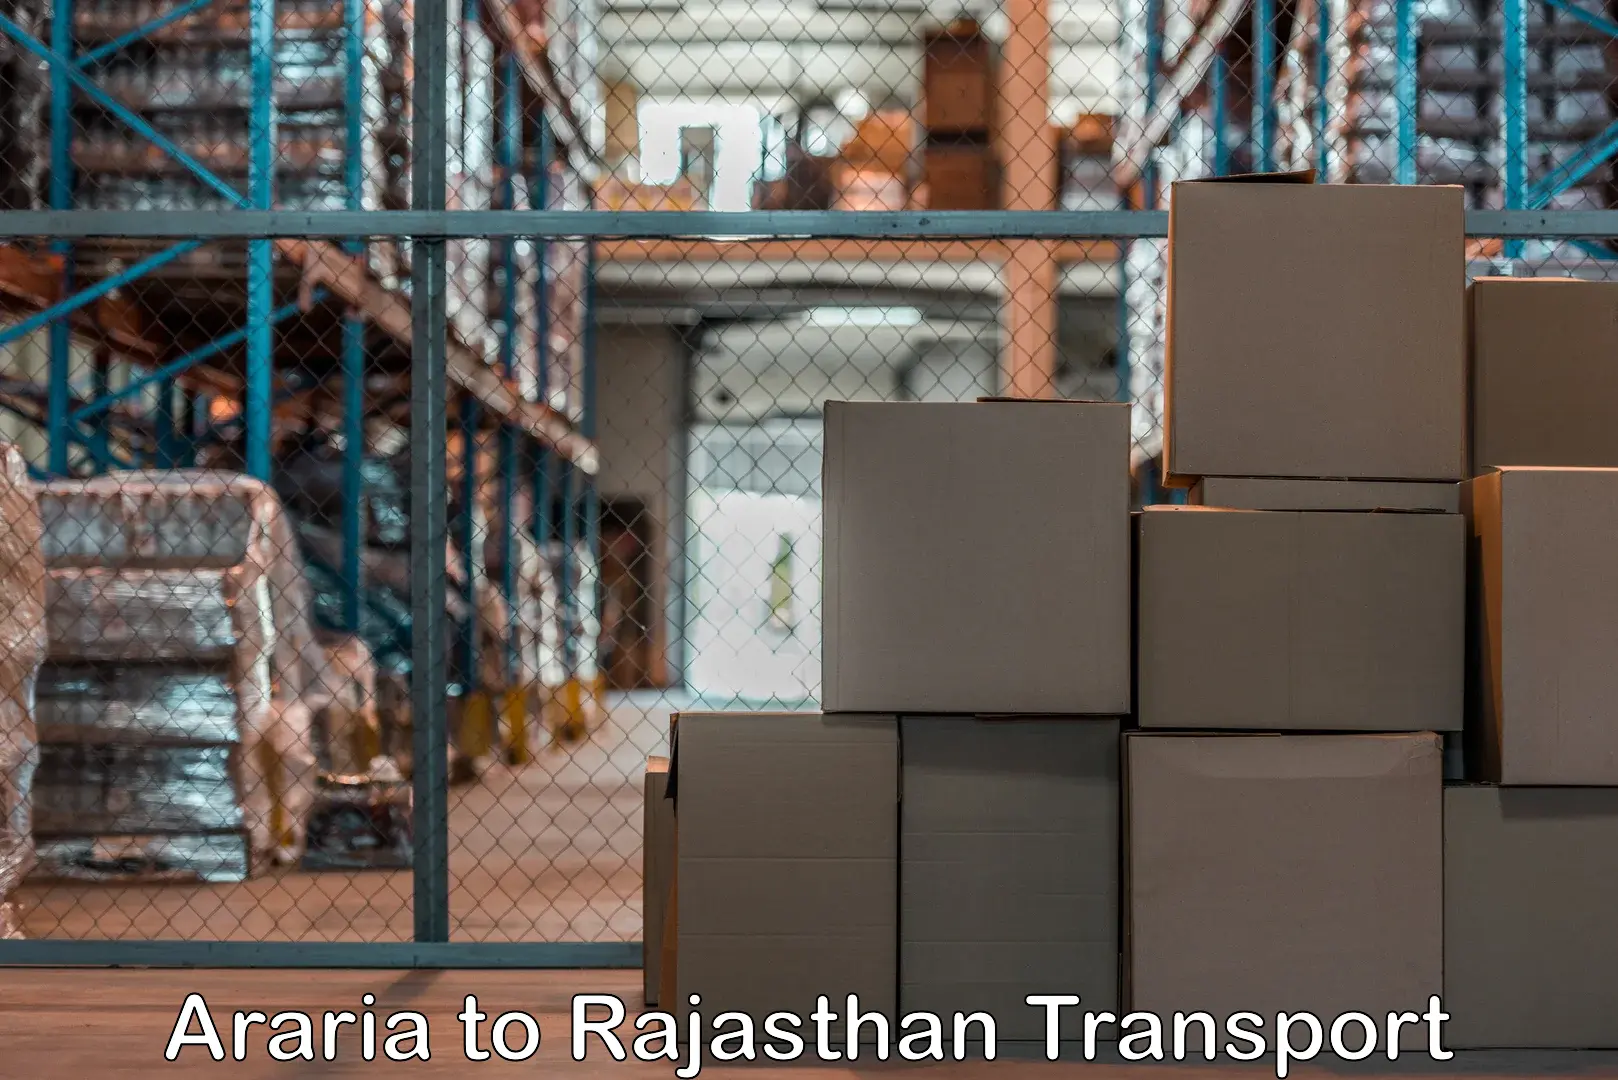 Transport in sharing Araria to Nohar